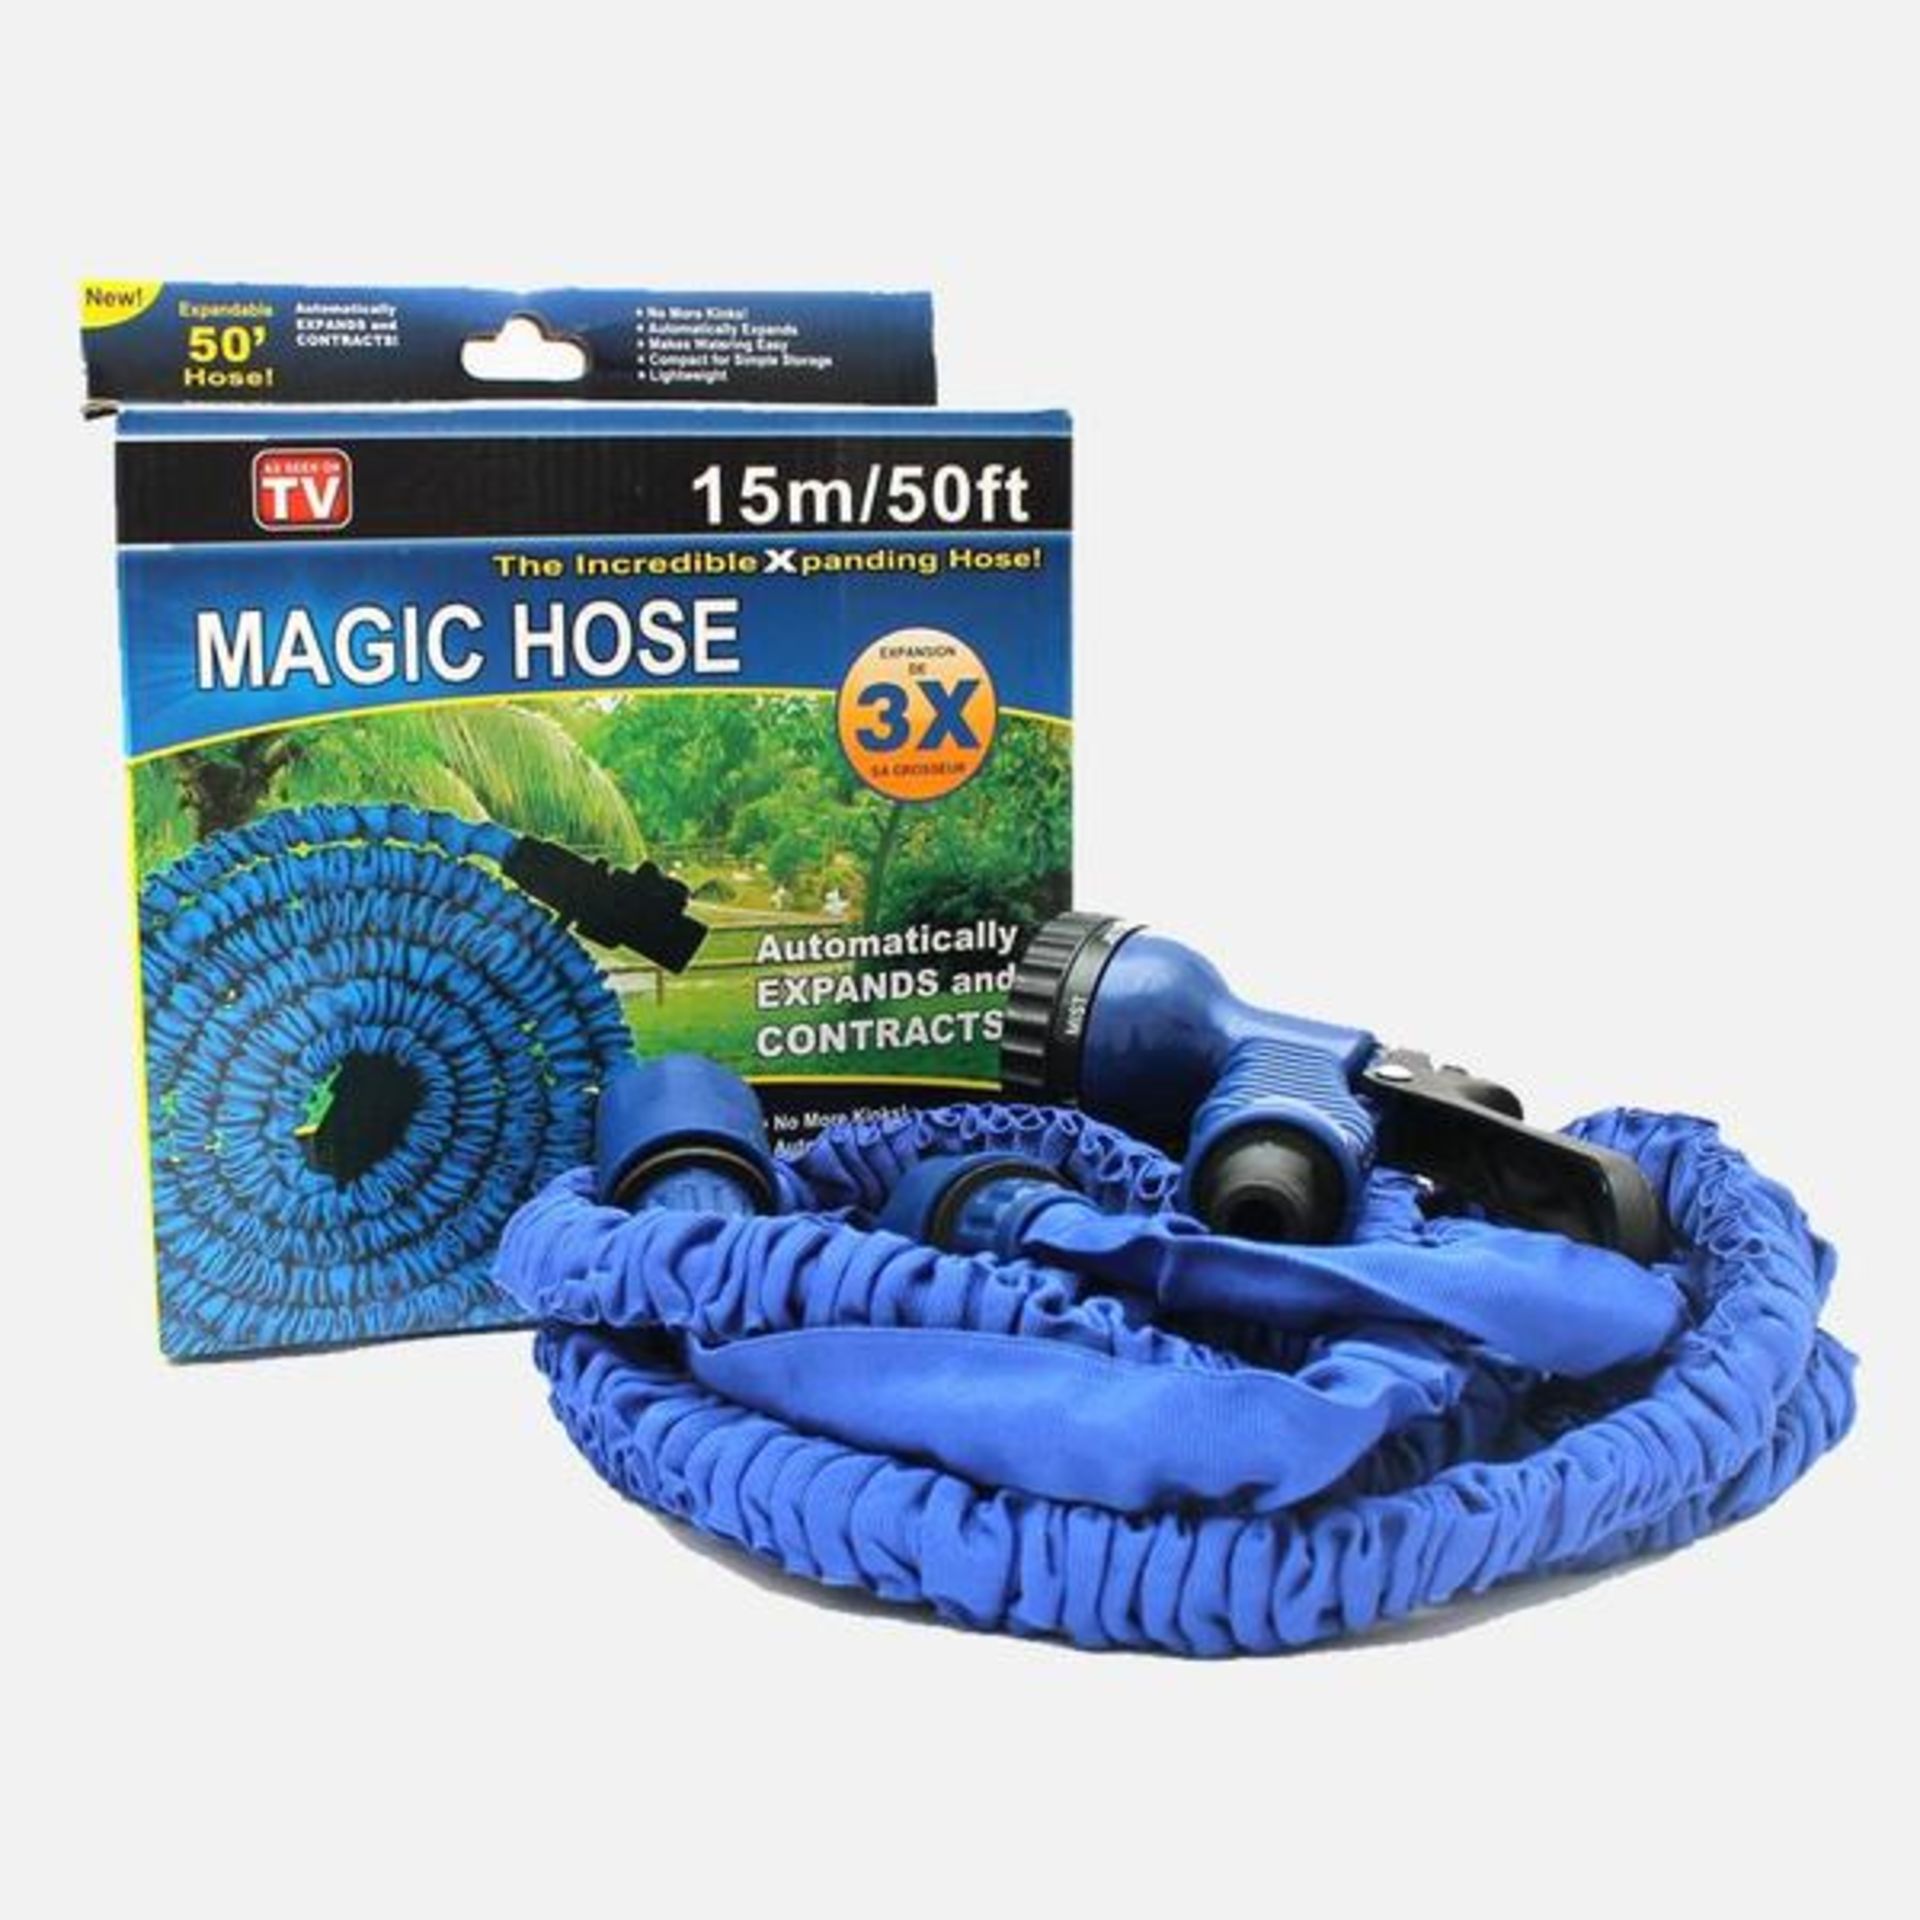 V *TRADE QTY* Brand New 50 foot (15 metre) Incredible Magic Hose (As Seen On TV) - Automatically